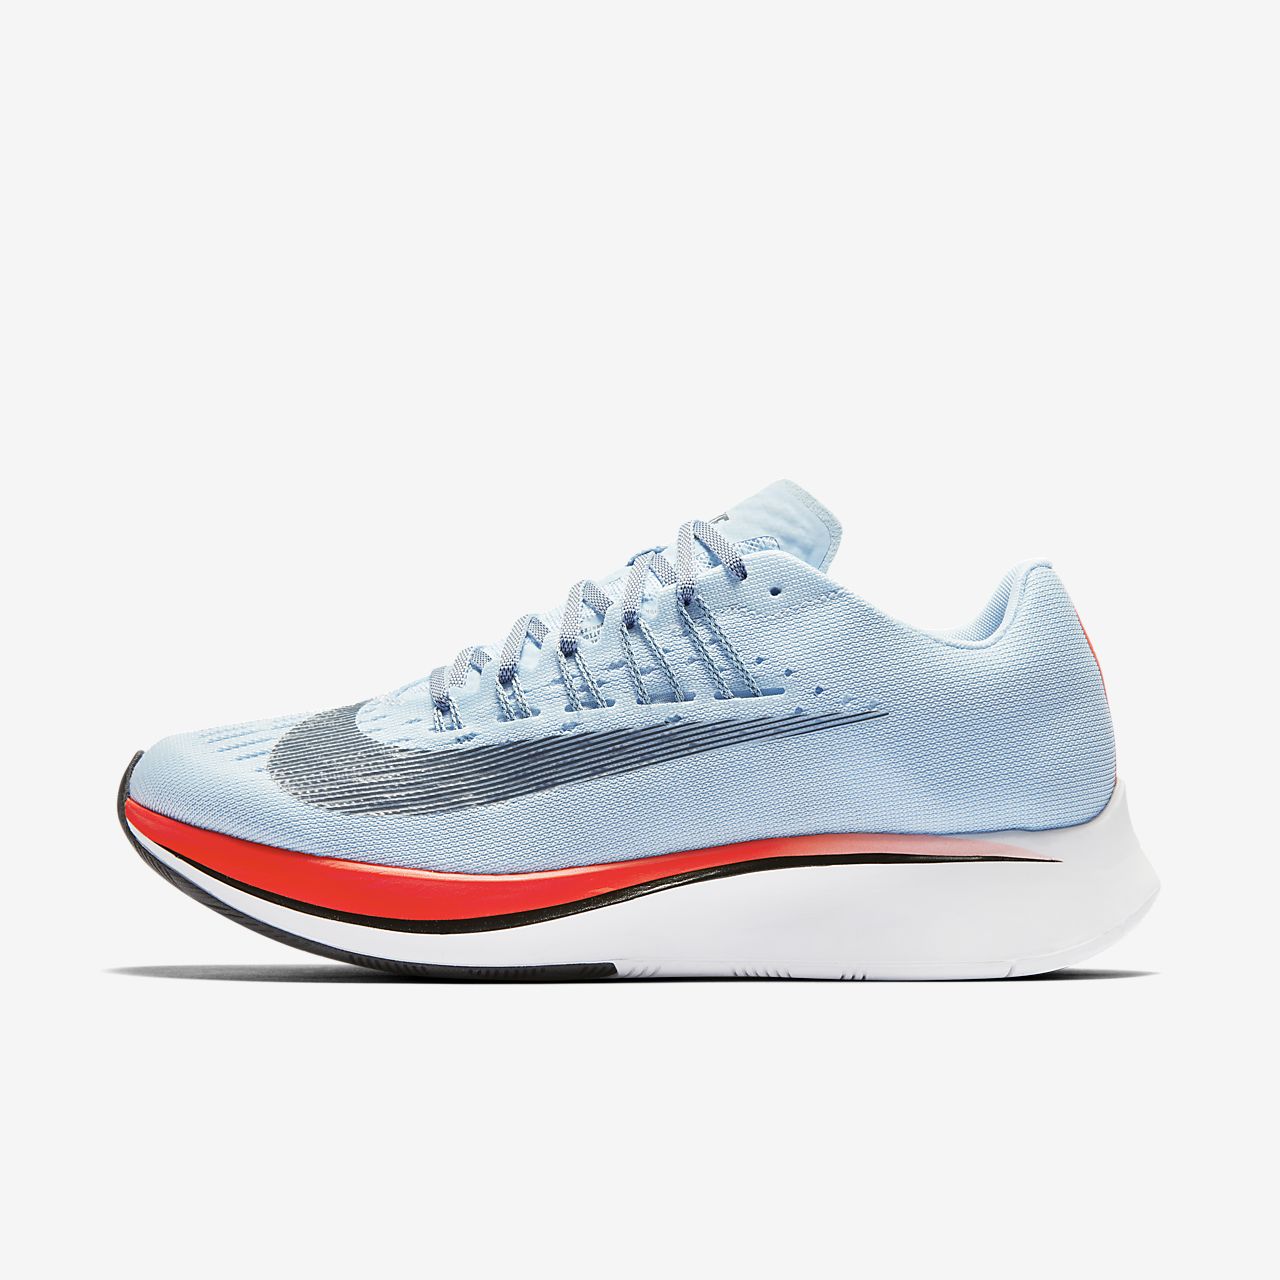 nike zoom fly women's shoes off 60 